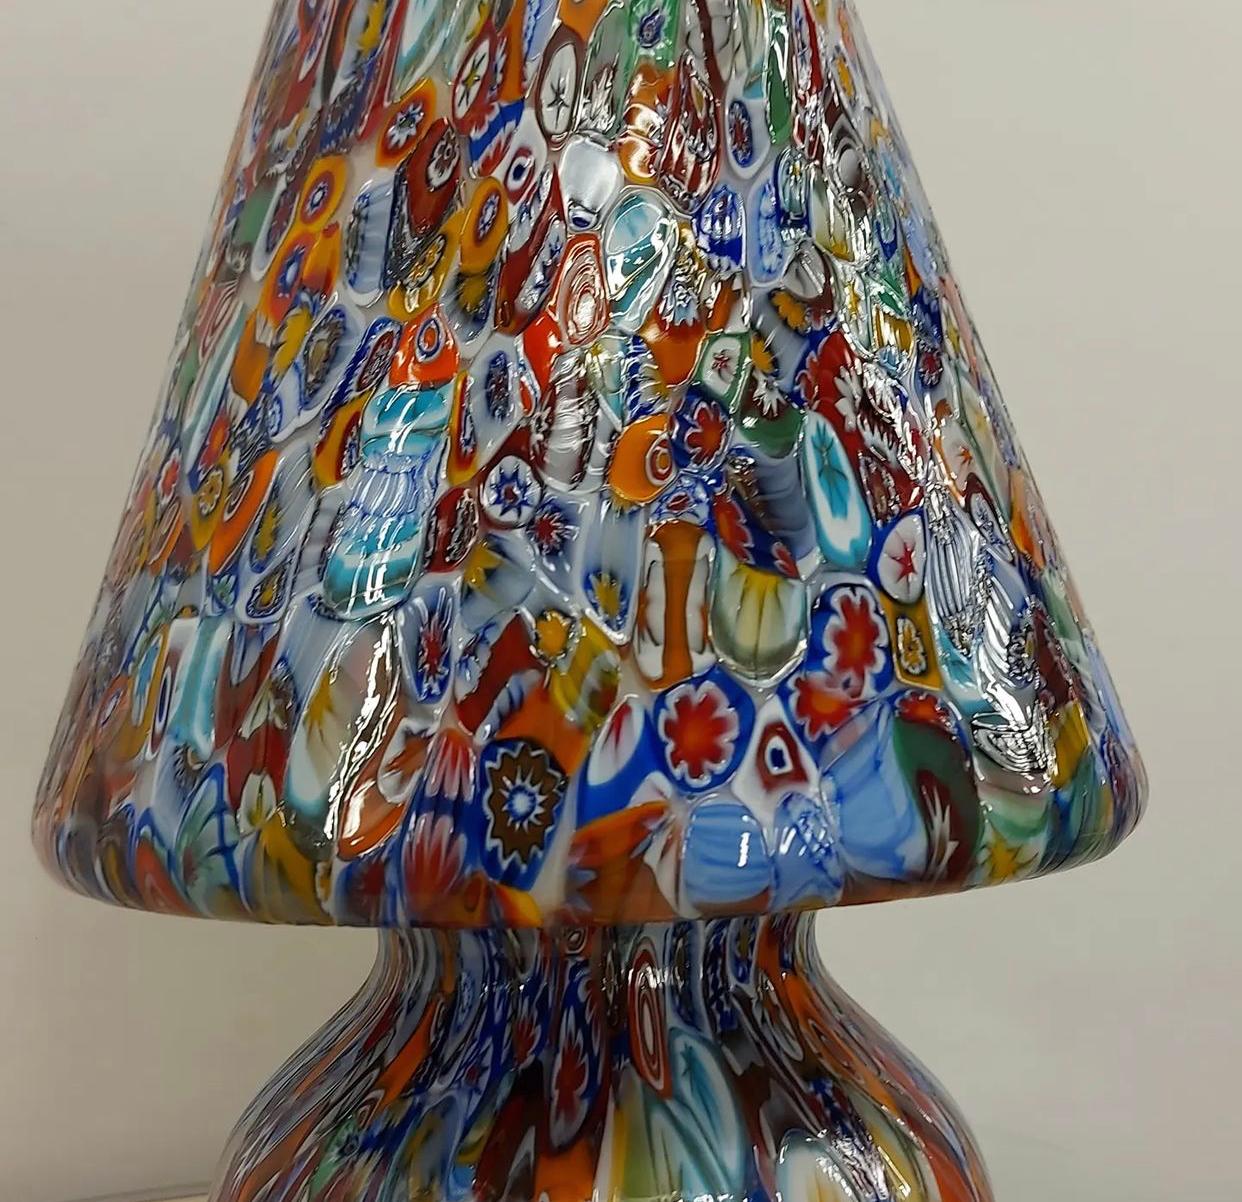 Pair of Big Hancrafted Murano Table Lamps Murrine Millefiori Decor, Italy 2000's For Sale 6